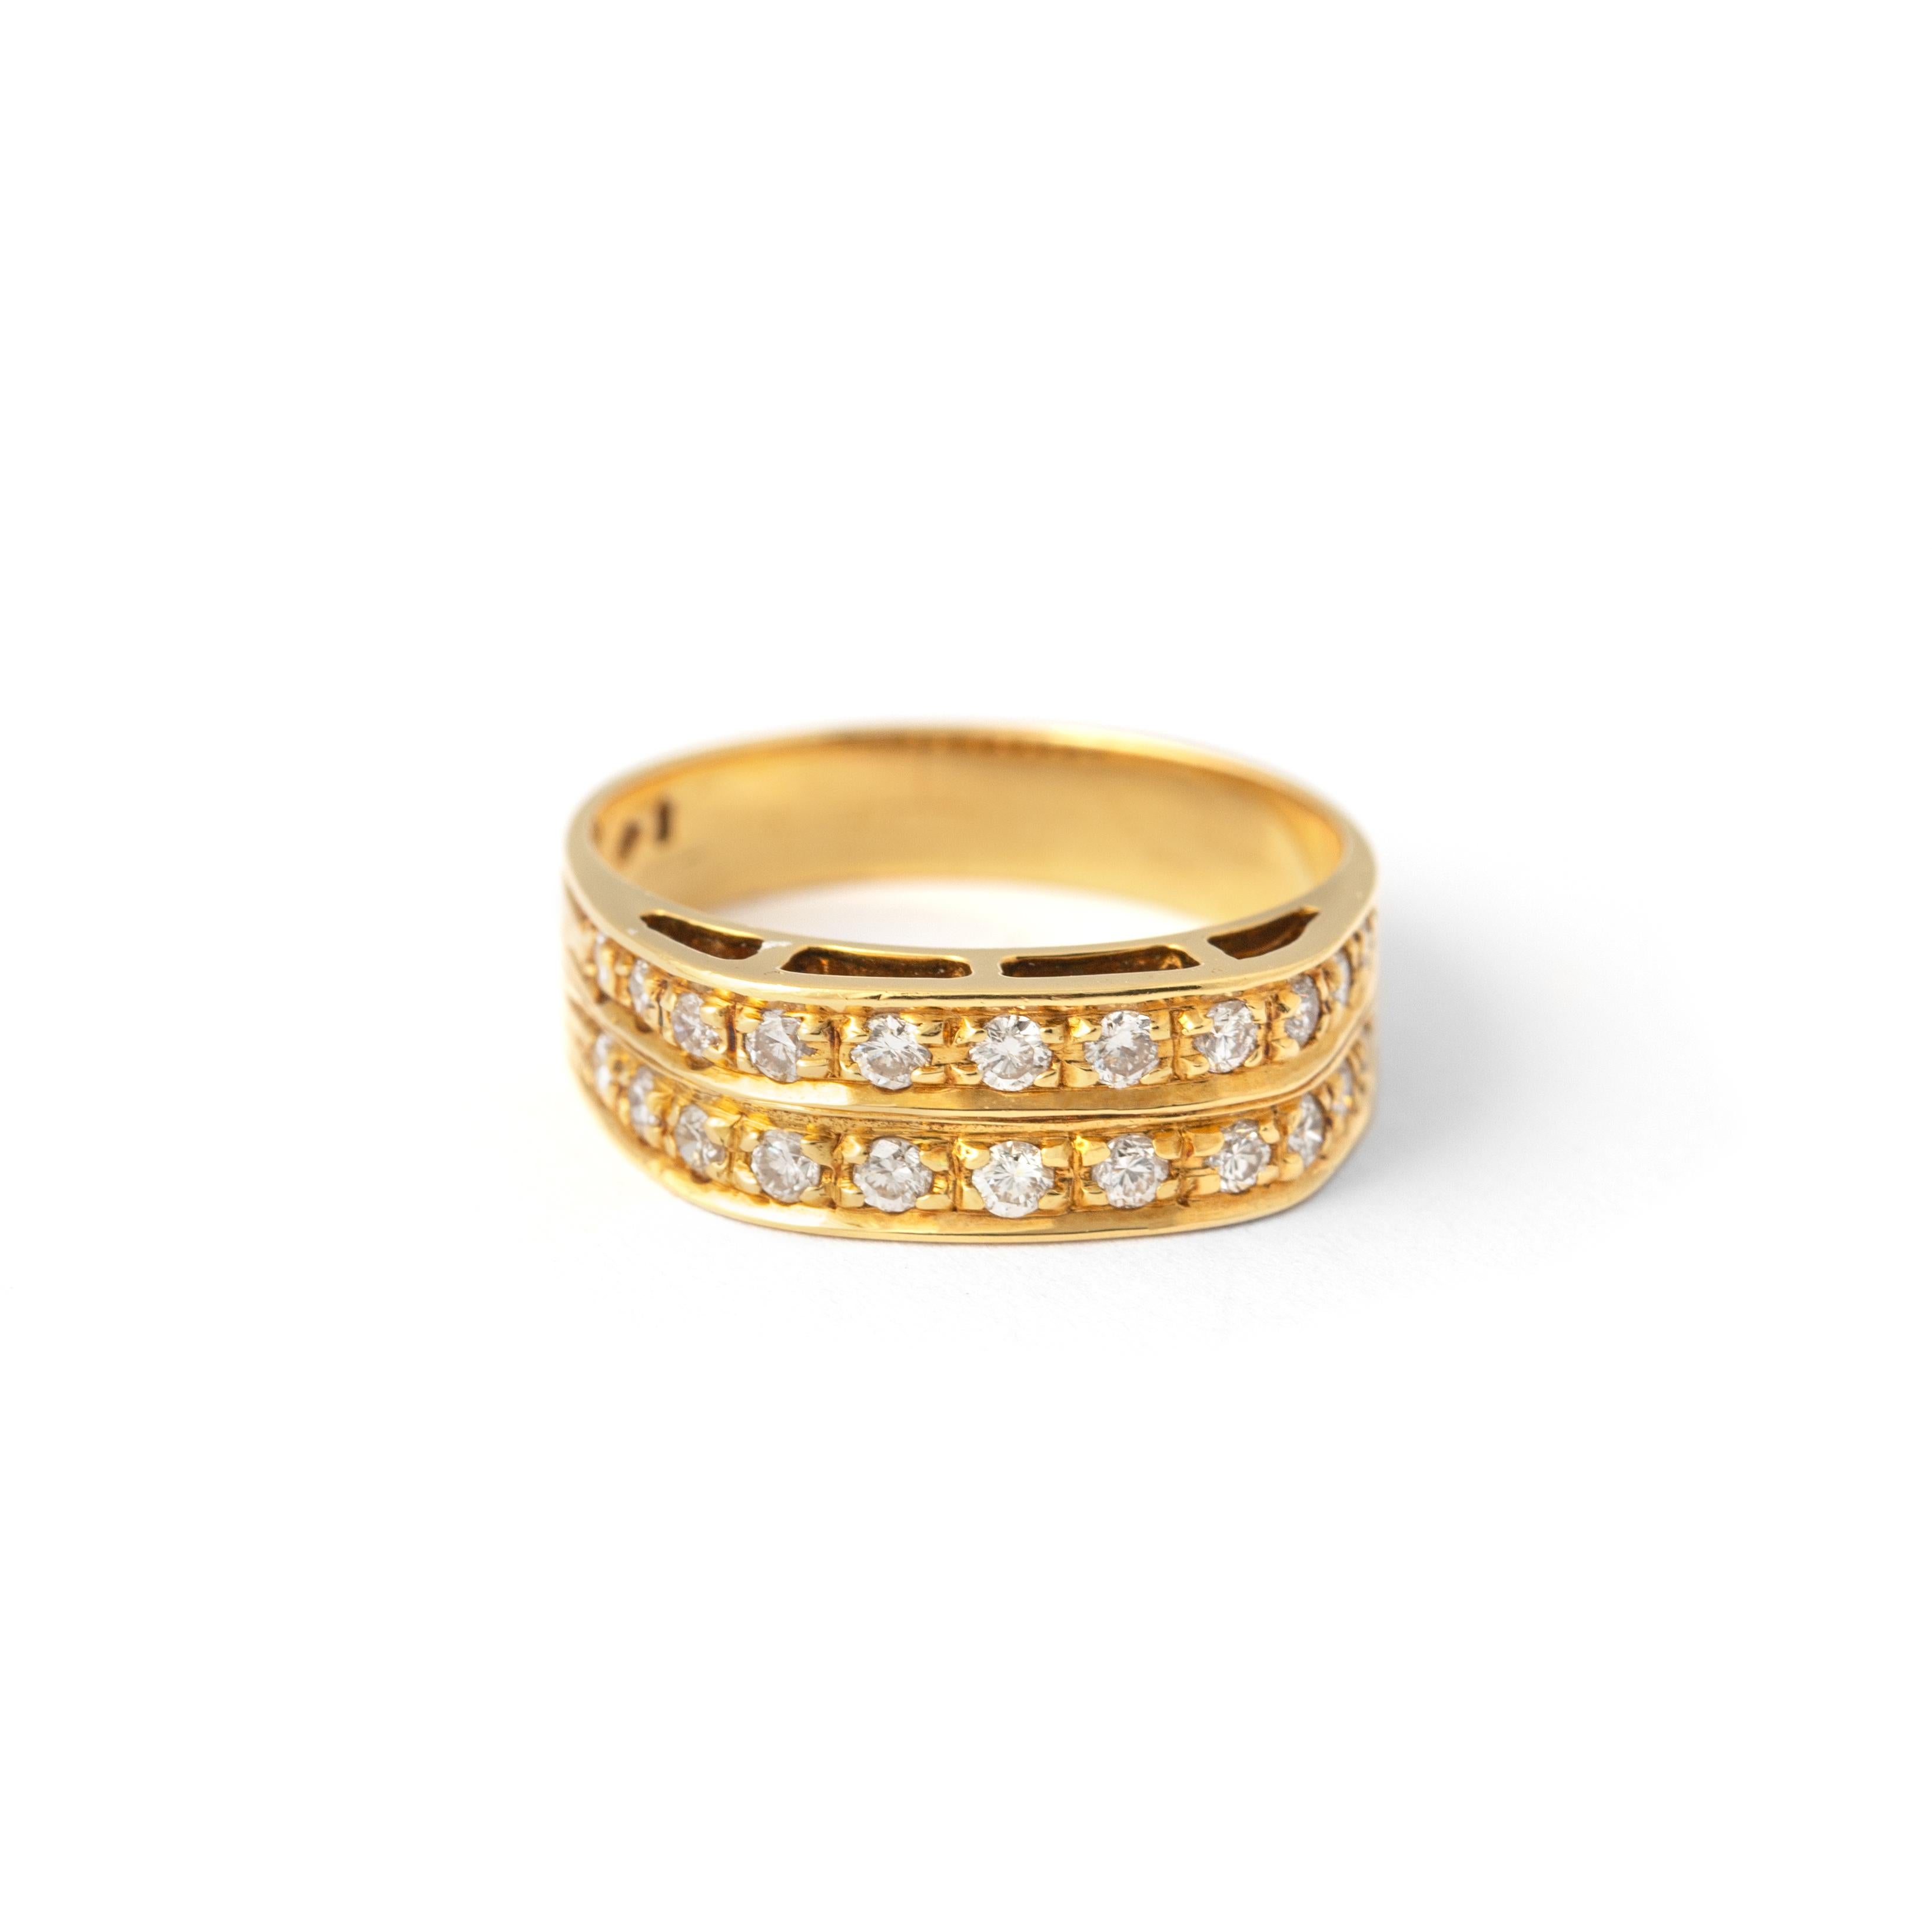 Diamond Yellow Gold 18K Ring.
Set by Diamond of 0,33 carat estimated F color and VVS clarity. 
Size: 4.5
Total gross weight: 3.07 grams.
